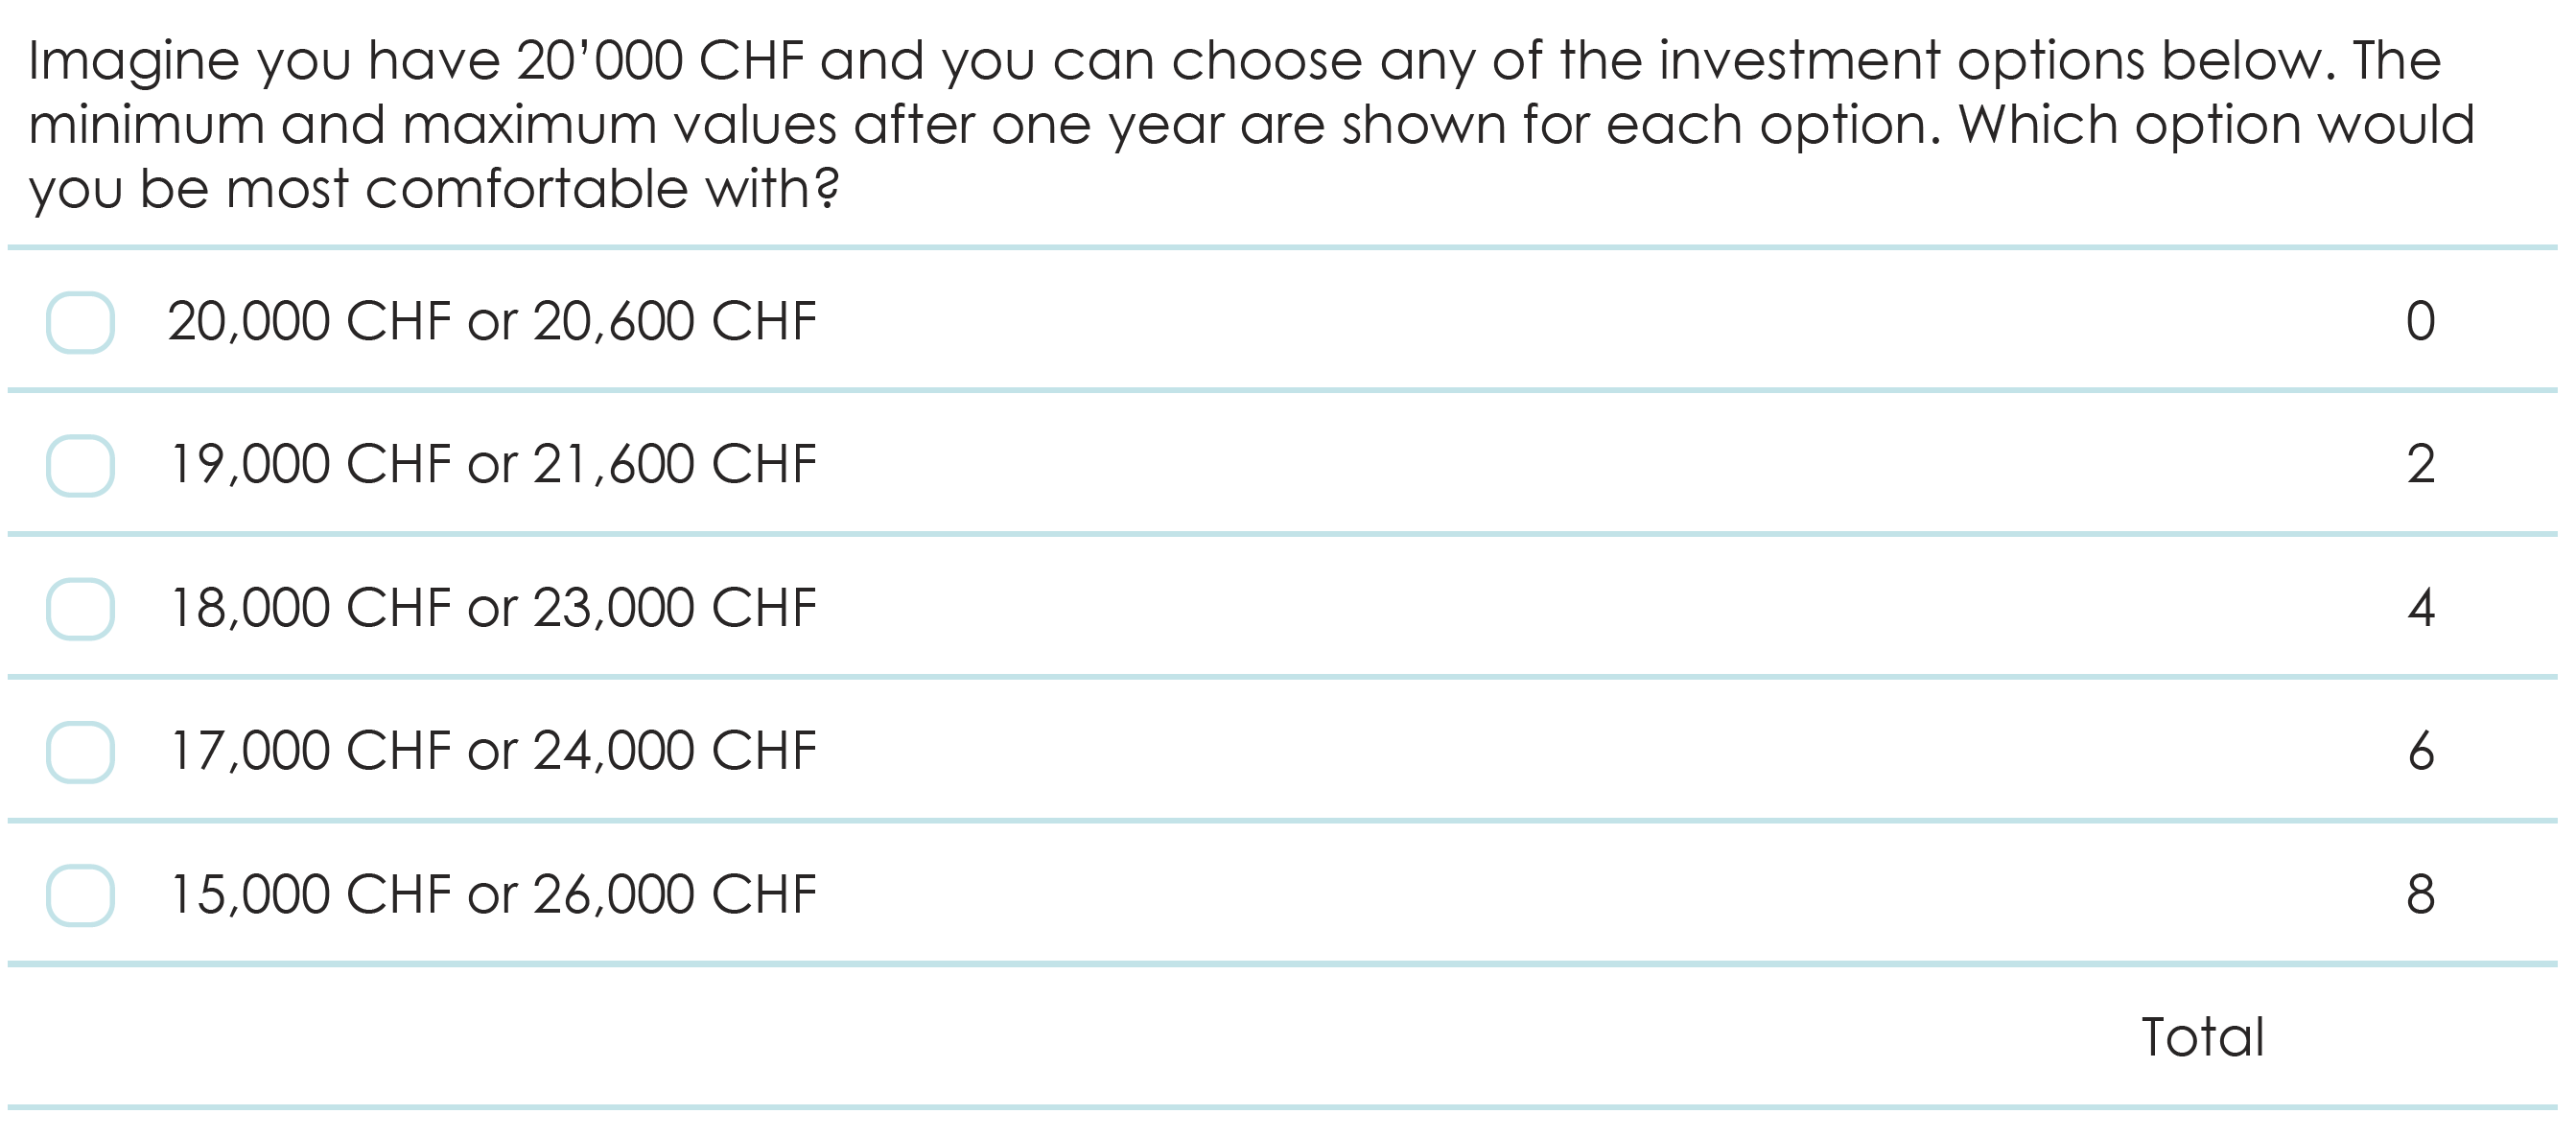 Example of a question to determine the investor profile. 